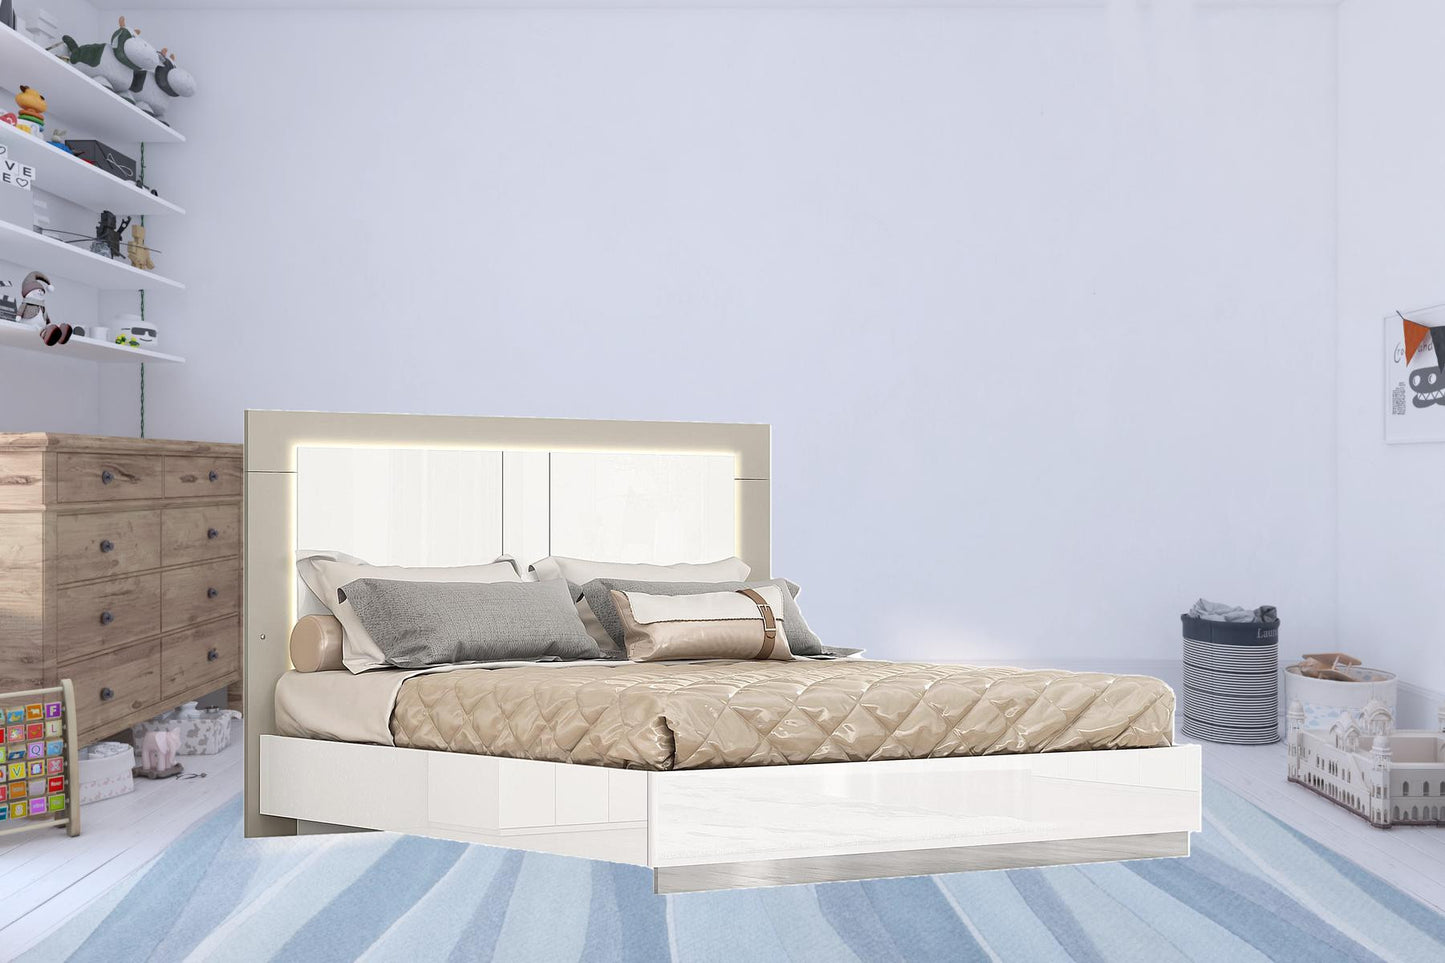 Queen White and Taupe High Gloss Bed Frame with LED Headboard